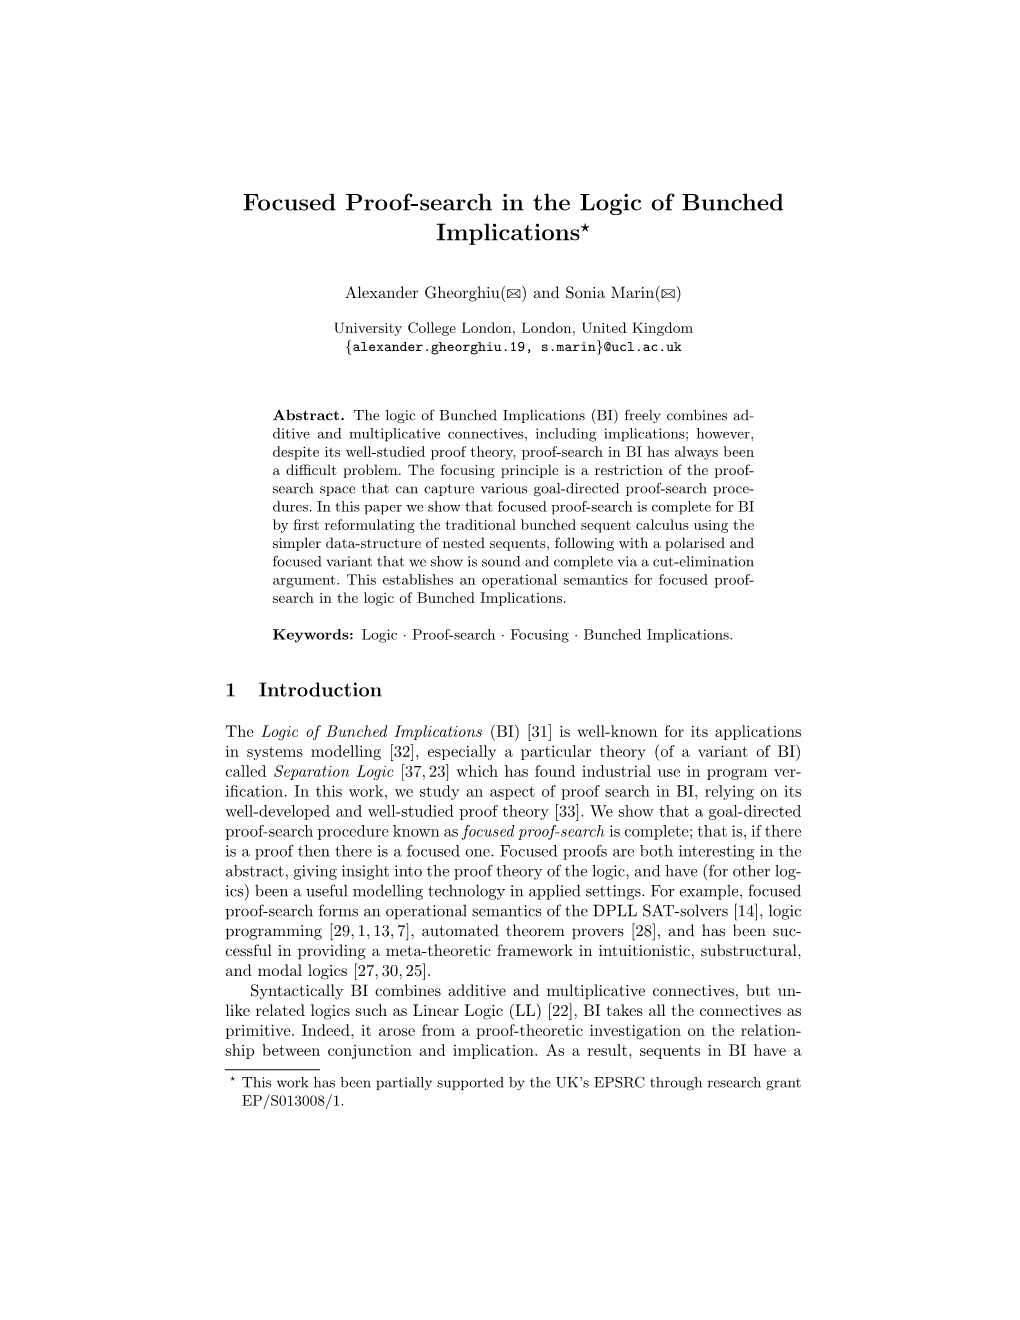 Focused Proof-Search in the Logic of Bunched Implications⋆